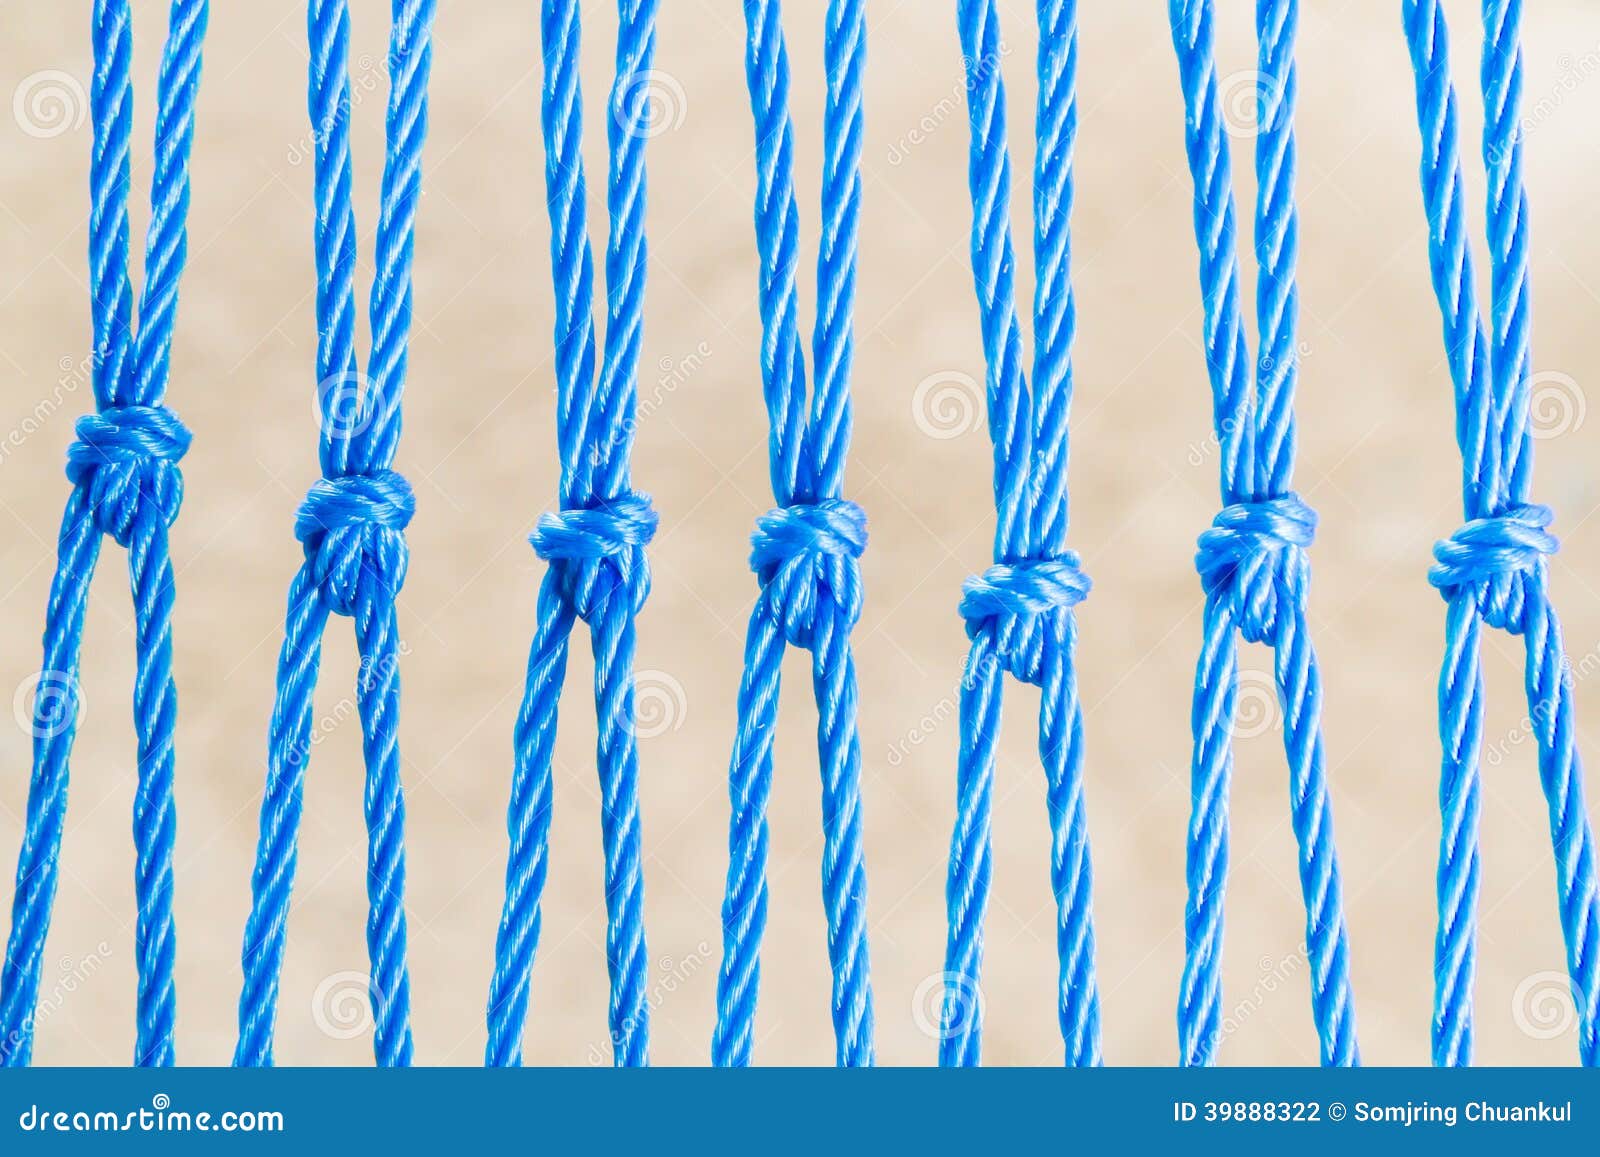 Nyron ropes with knot stock photo. Image of figure, knot - 39888322